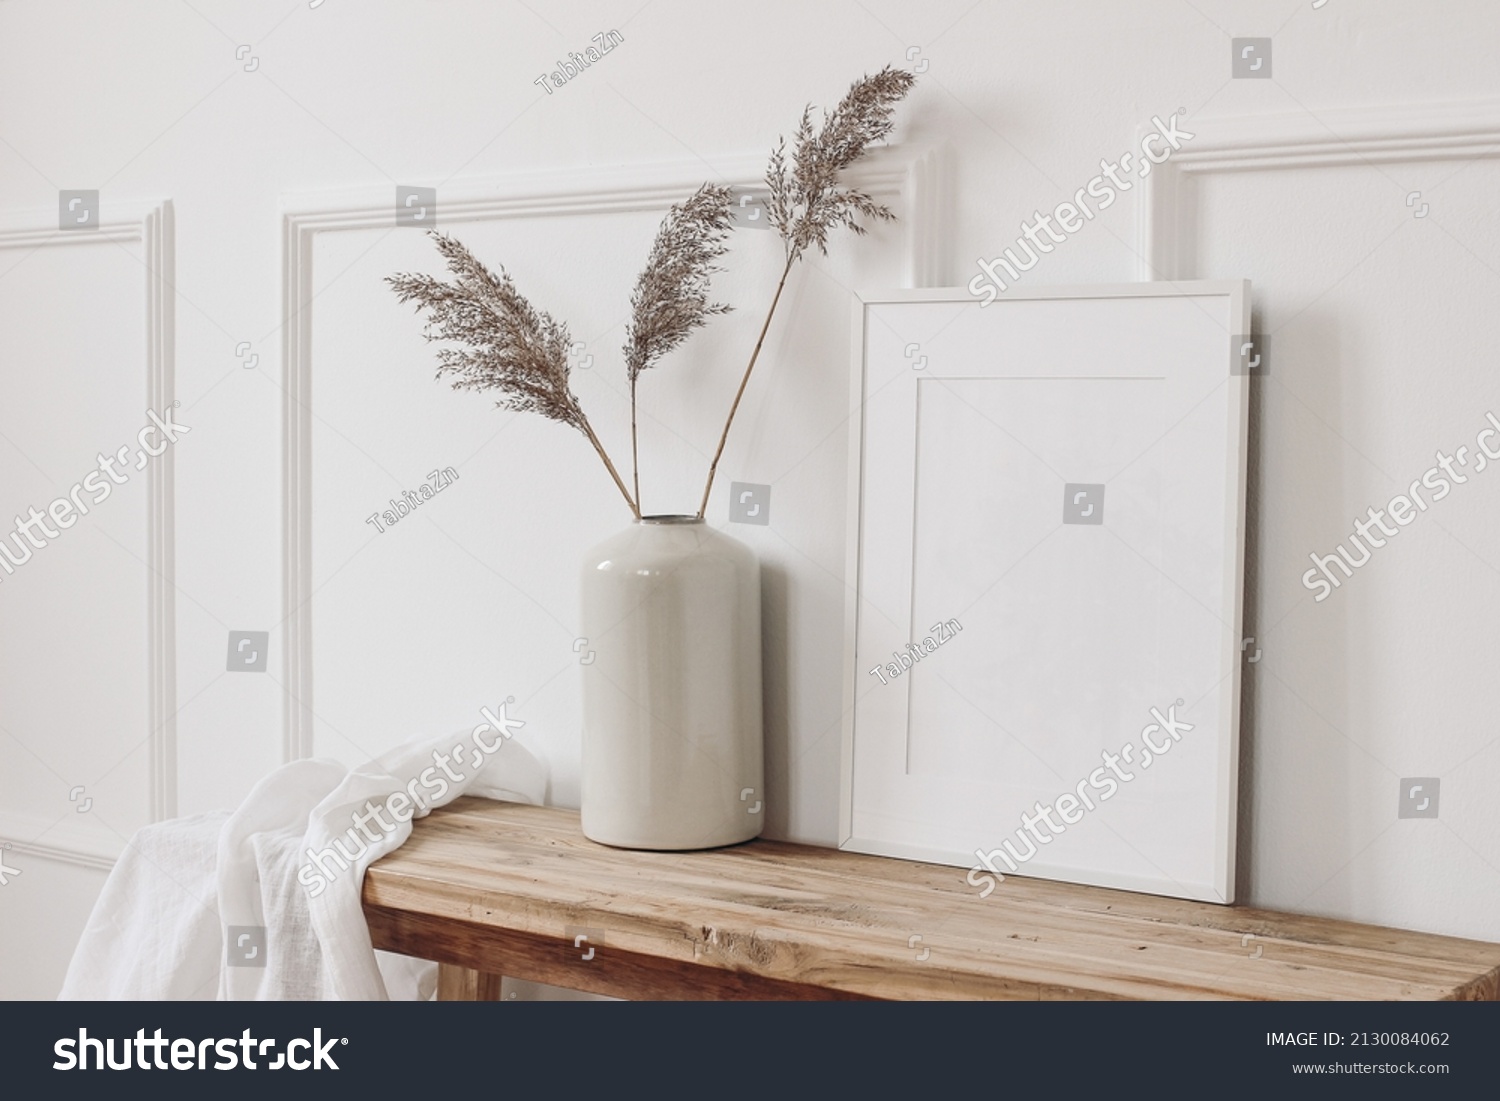 Elegant home interior decor still life photo. Vase with dry reed, grass on old wooden bench. Blank white picture frame mockup. Wall moulding background, trim decor. Empty copy space. Side view.  #2130084062